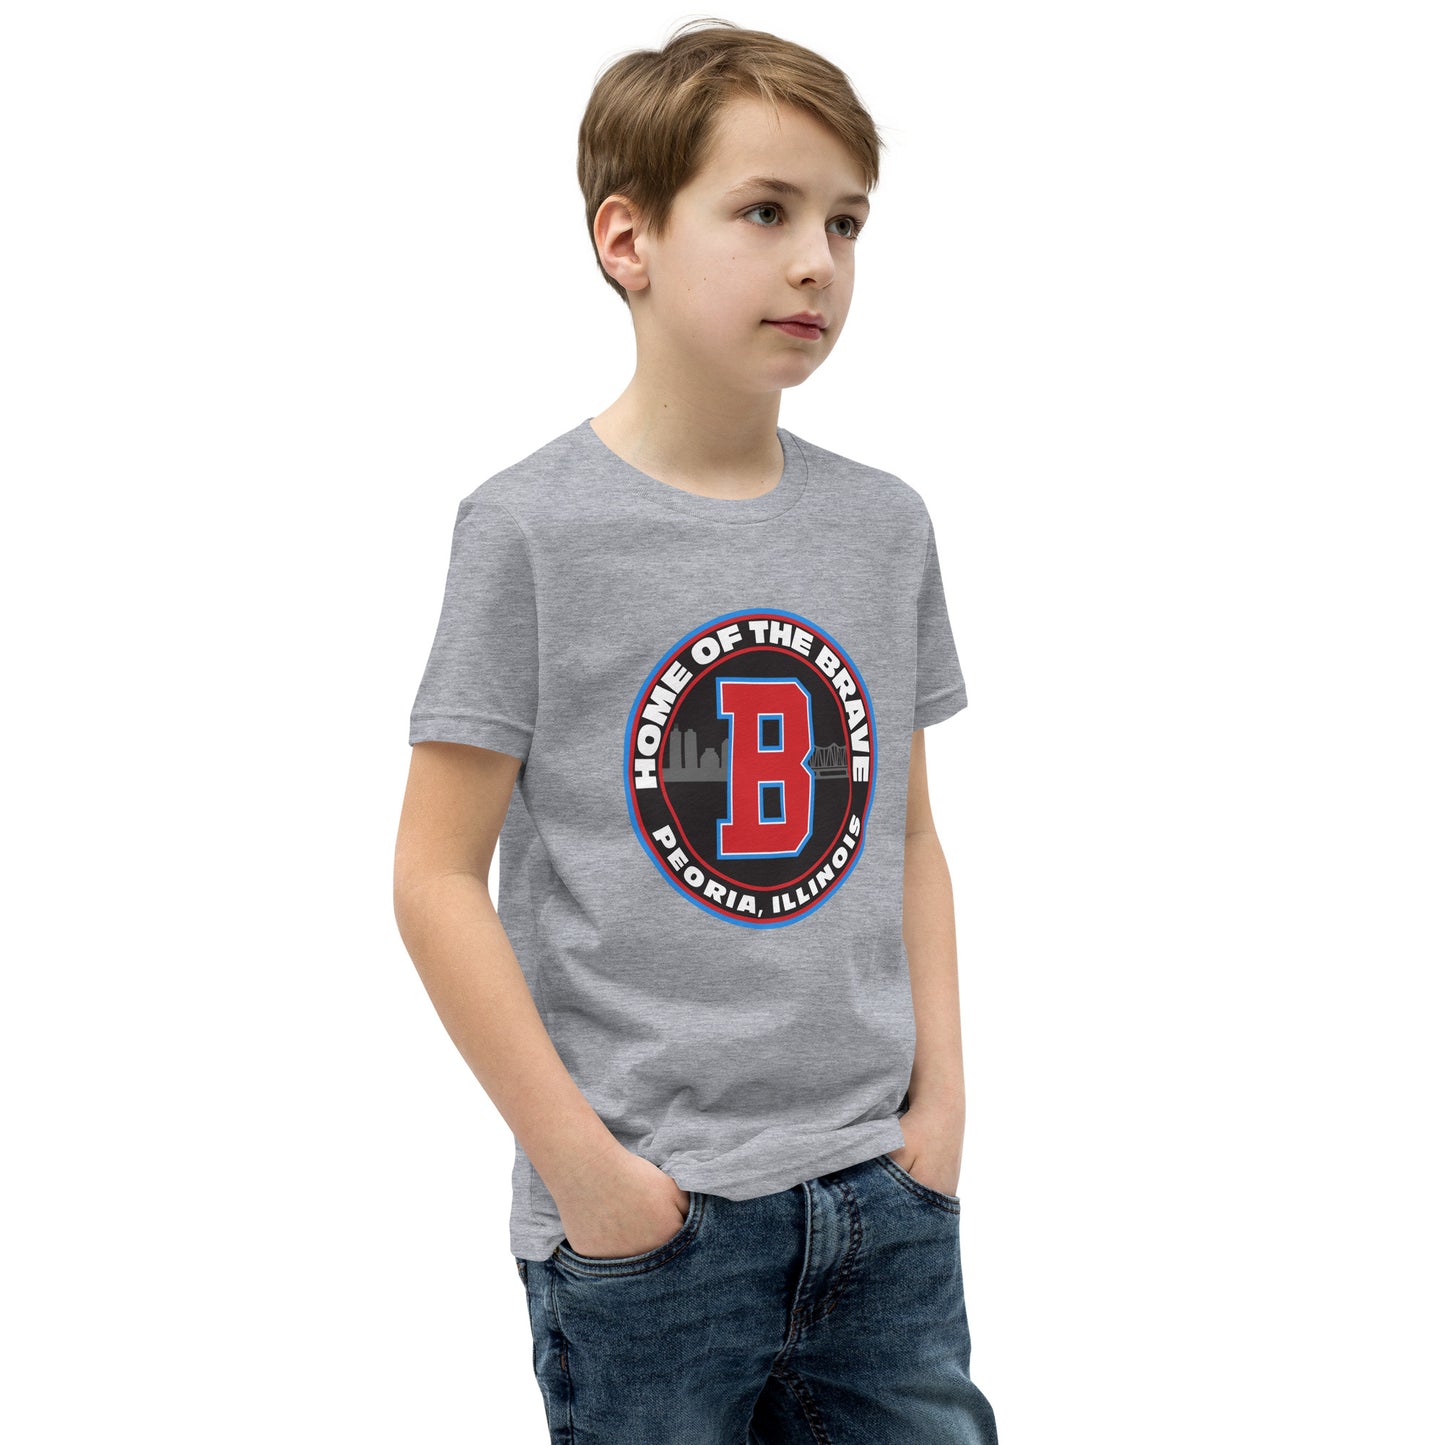 Home of the Brave Kids T-Shirt